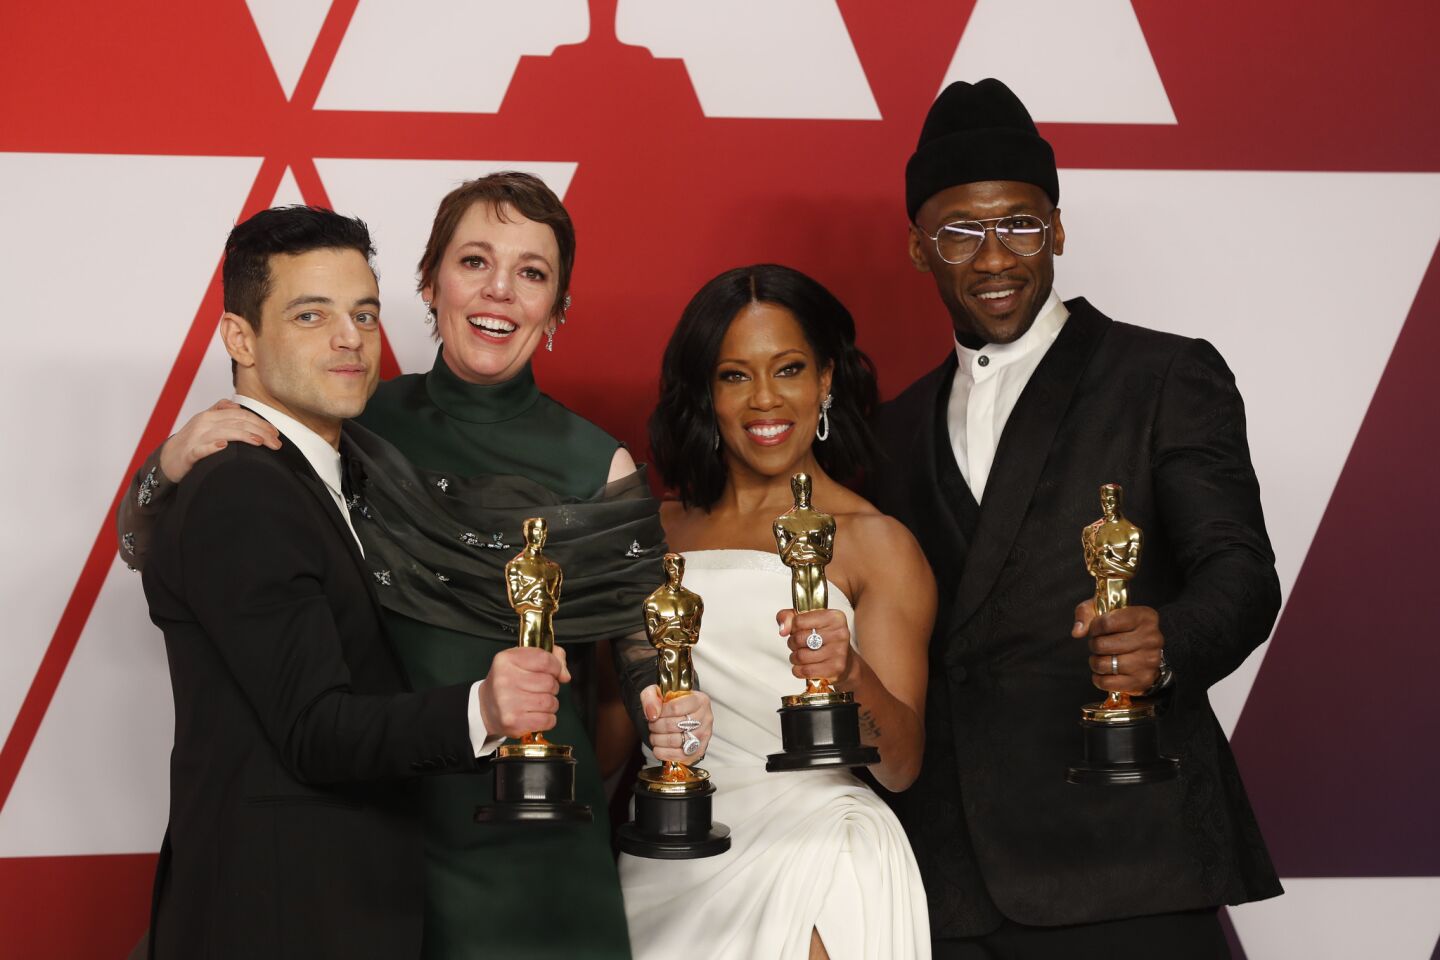 Rami Malek (lead actor), Olivia Coleman (lead actress), Regina King (supporting actress) and Mahershala Ali (supporting actor), winners in the Oscar acting categories.